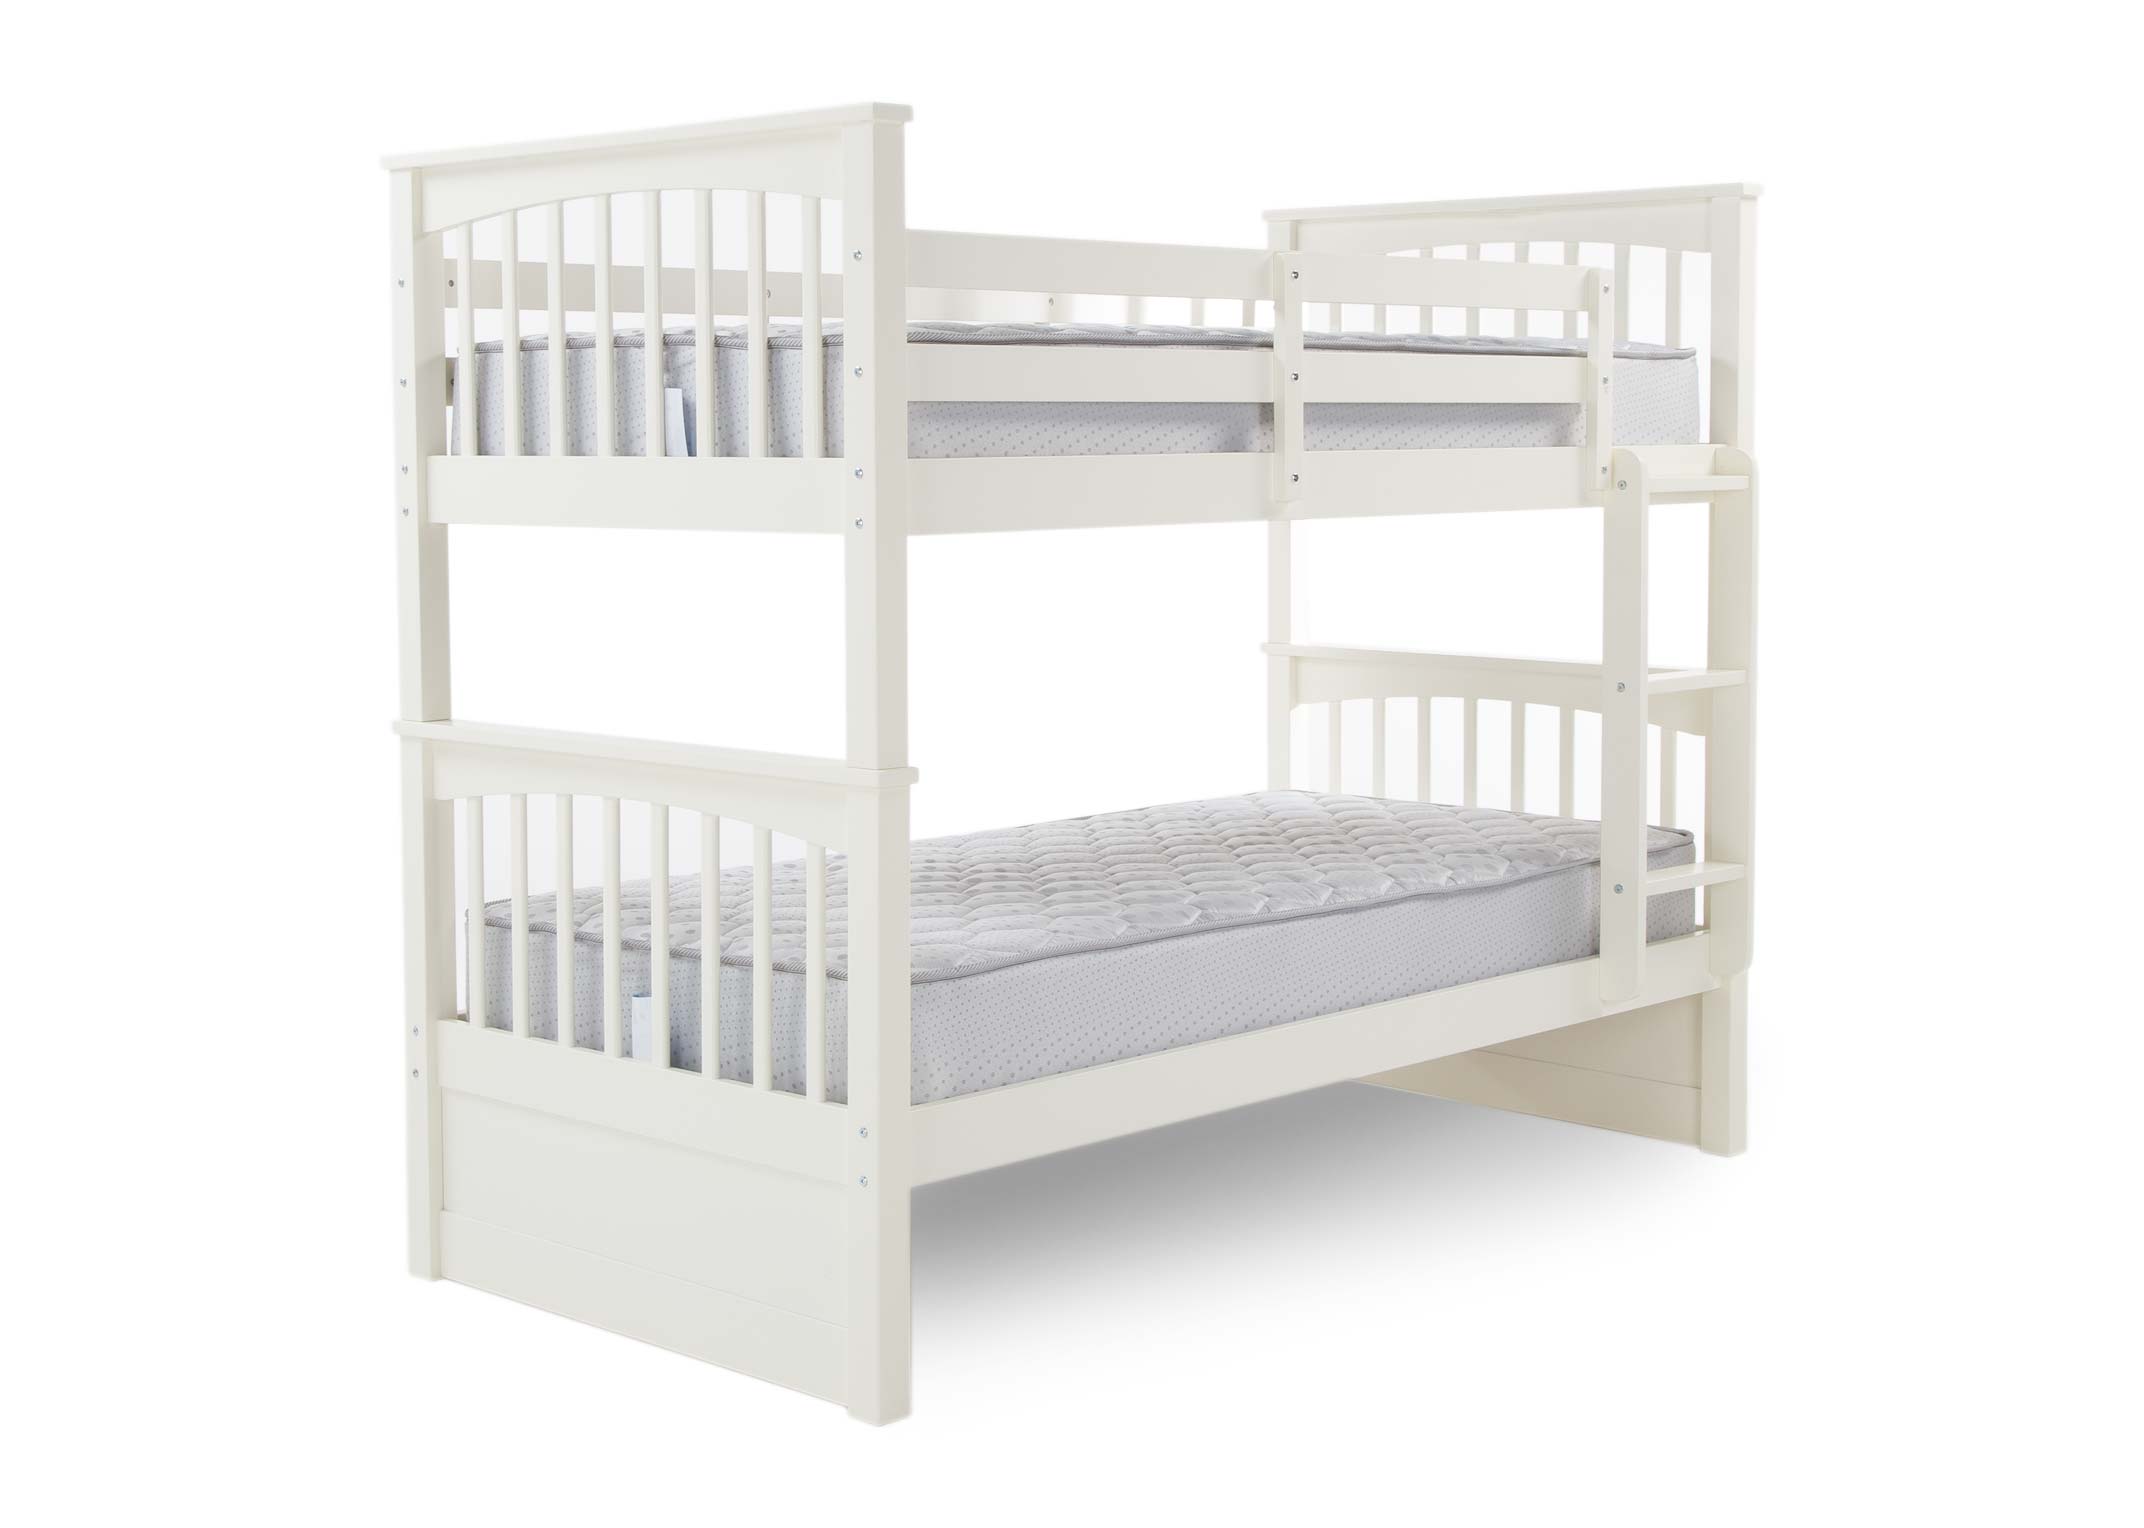 Single 3 Ft Off White Bunk Beds, Antique White Bunk Beds